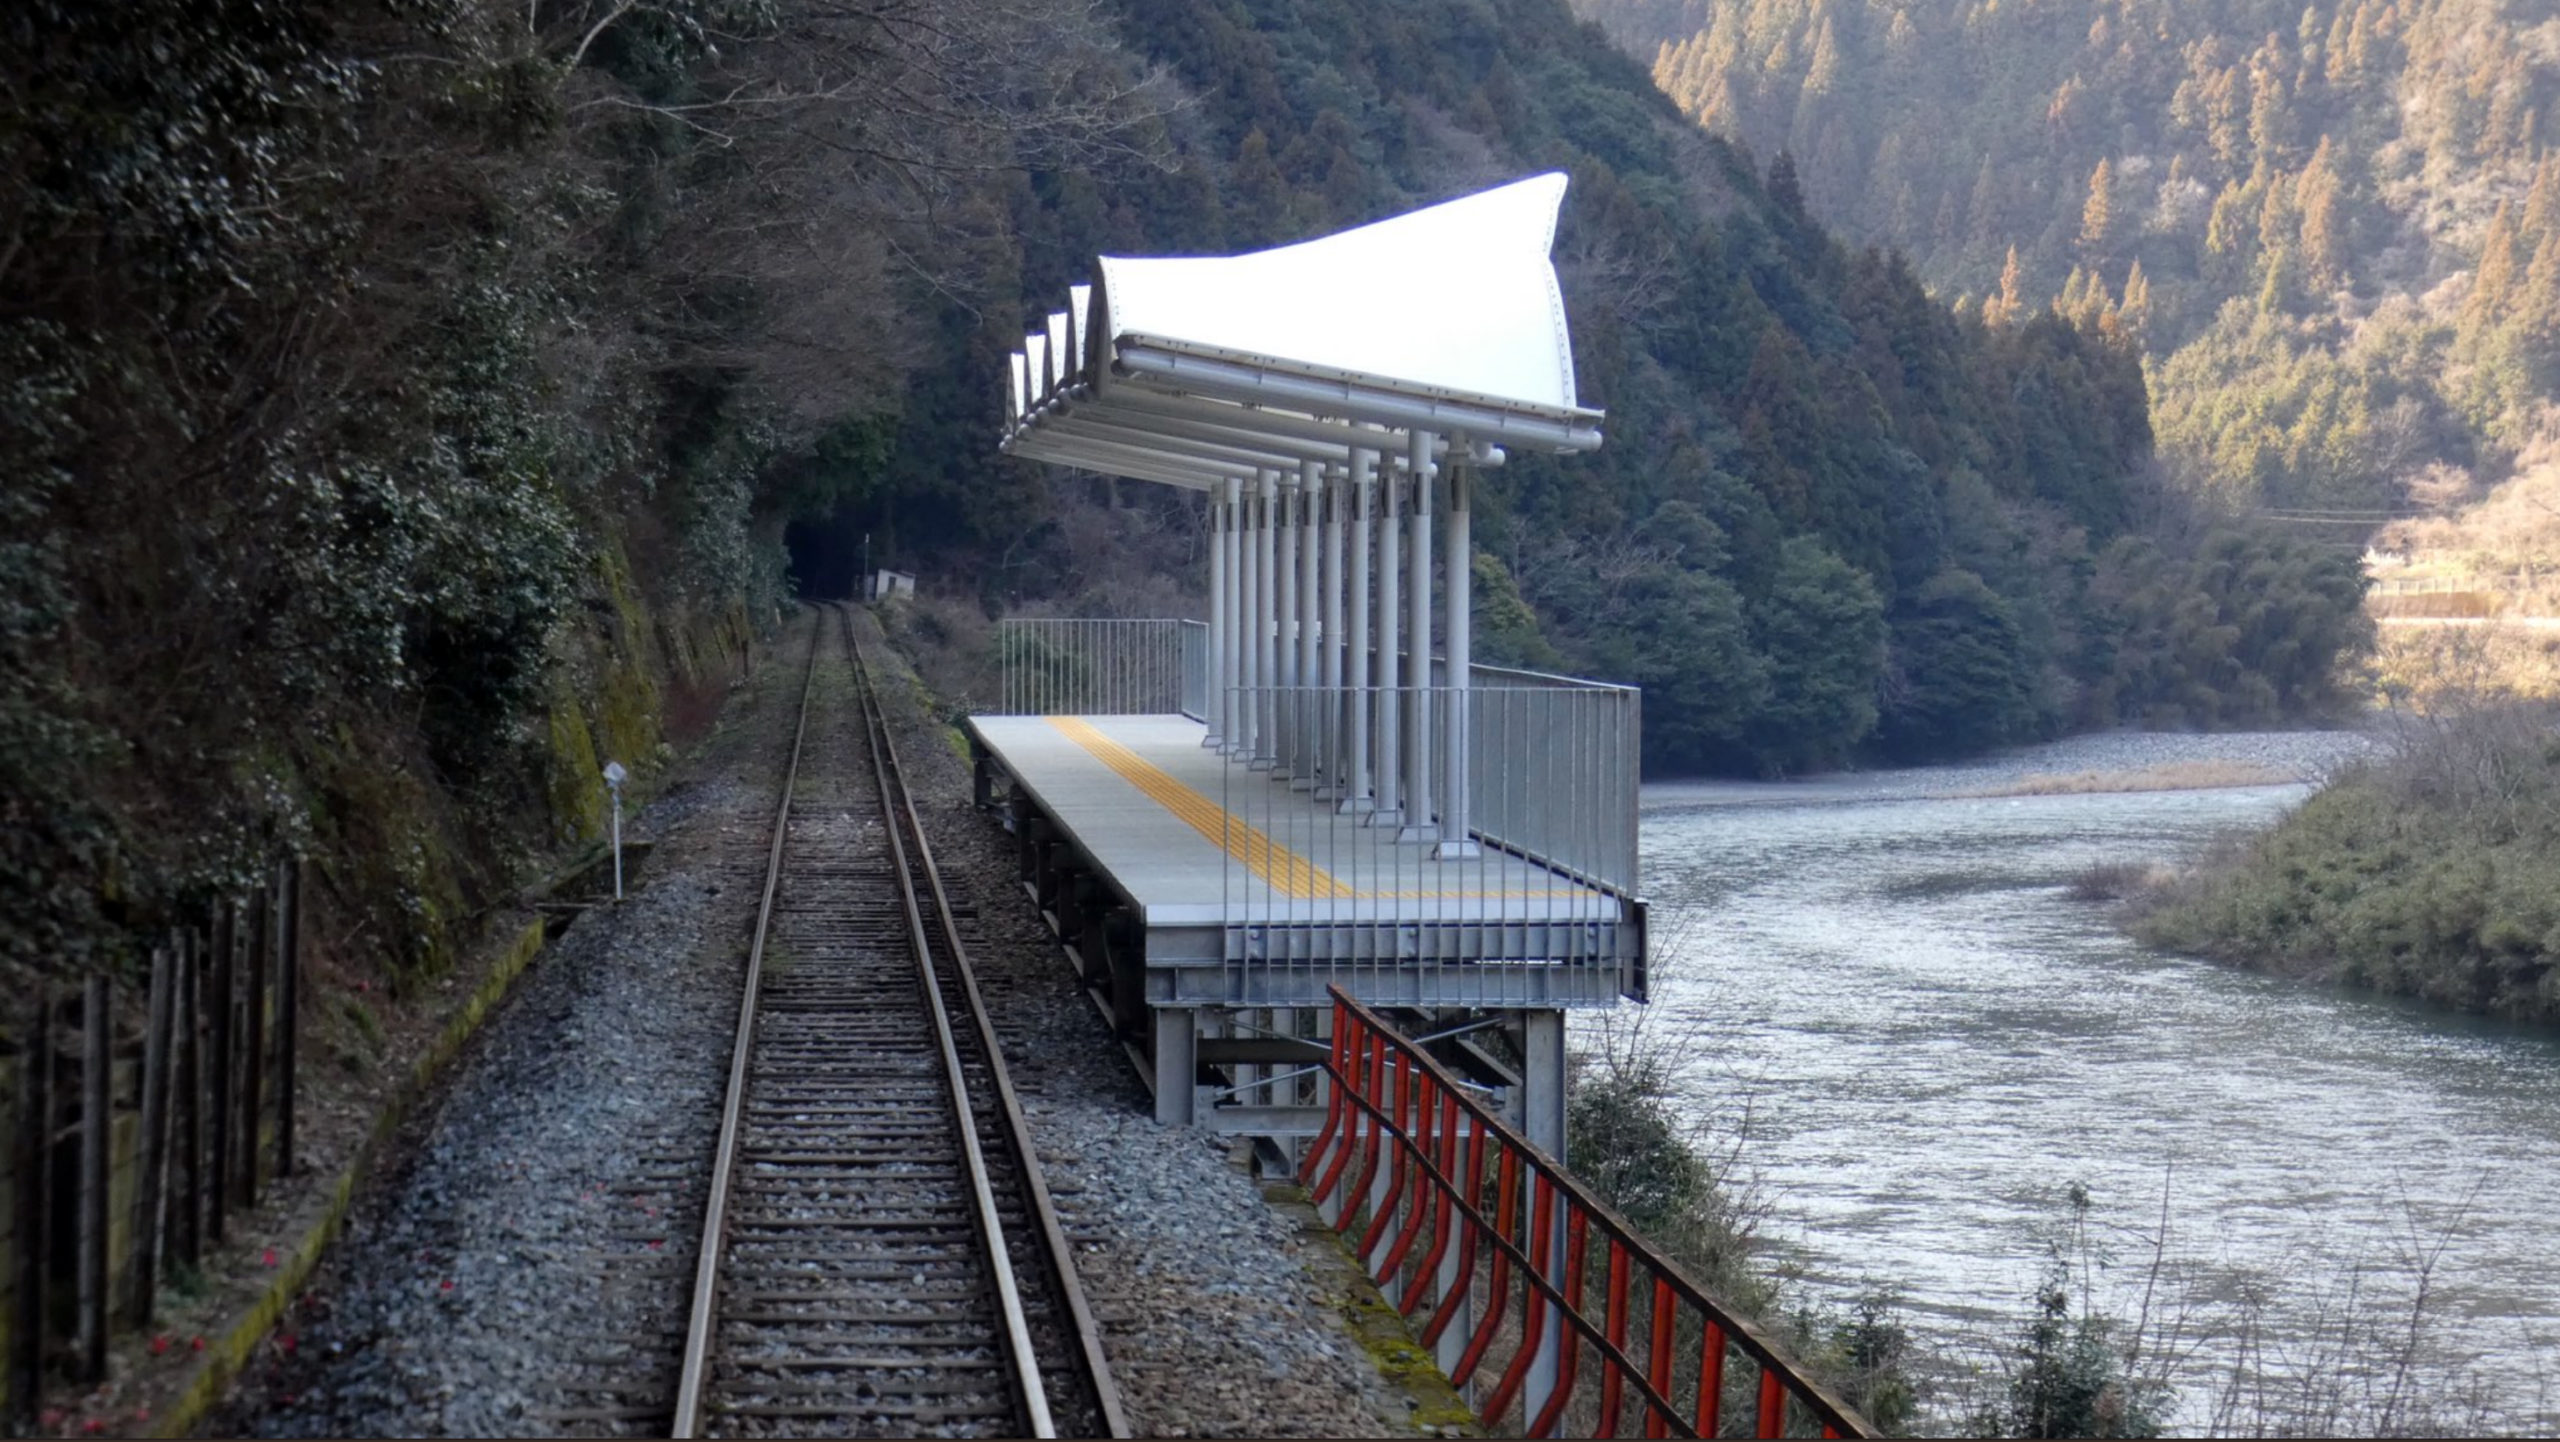 This+train+stop+in+Japan+has+no+entries+or+exits%2C+it+has+been+put+there+merely+so+that+people+can+stop+off+in+the+middle+of+a+train+journey+and+admire+the+scenery.